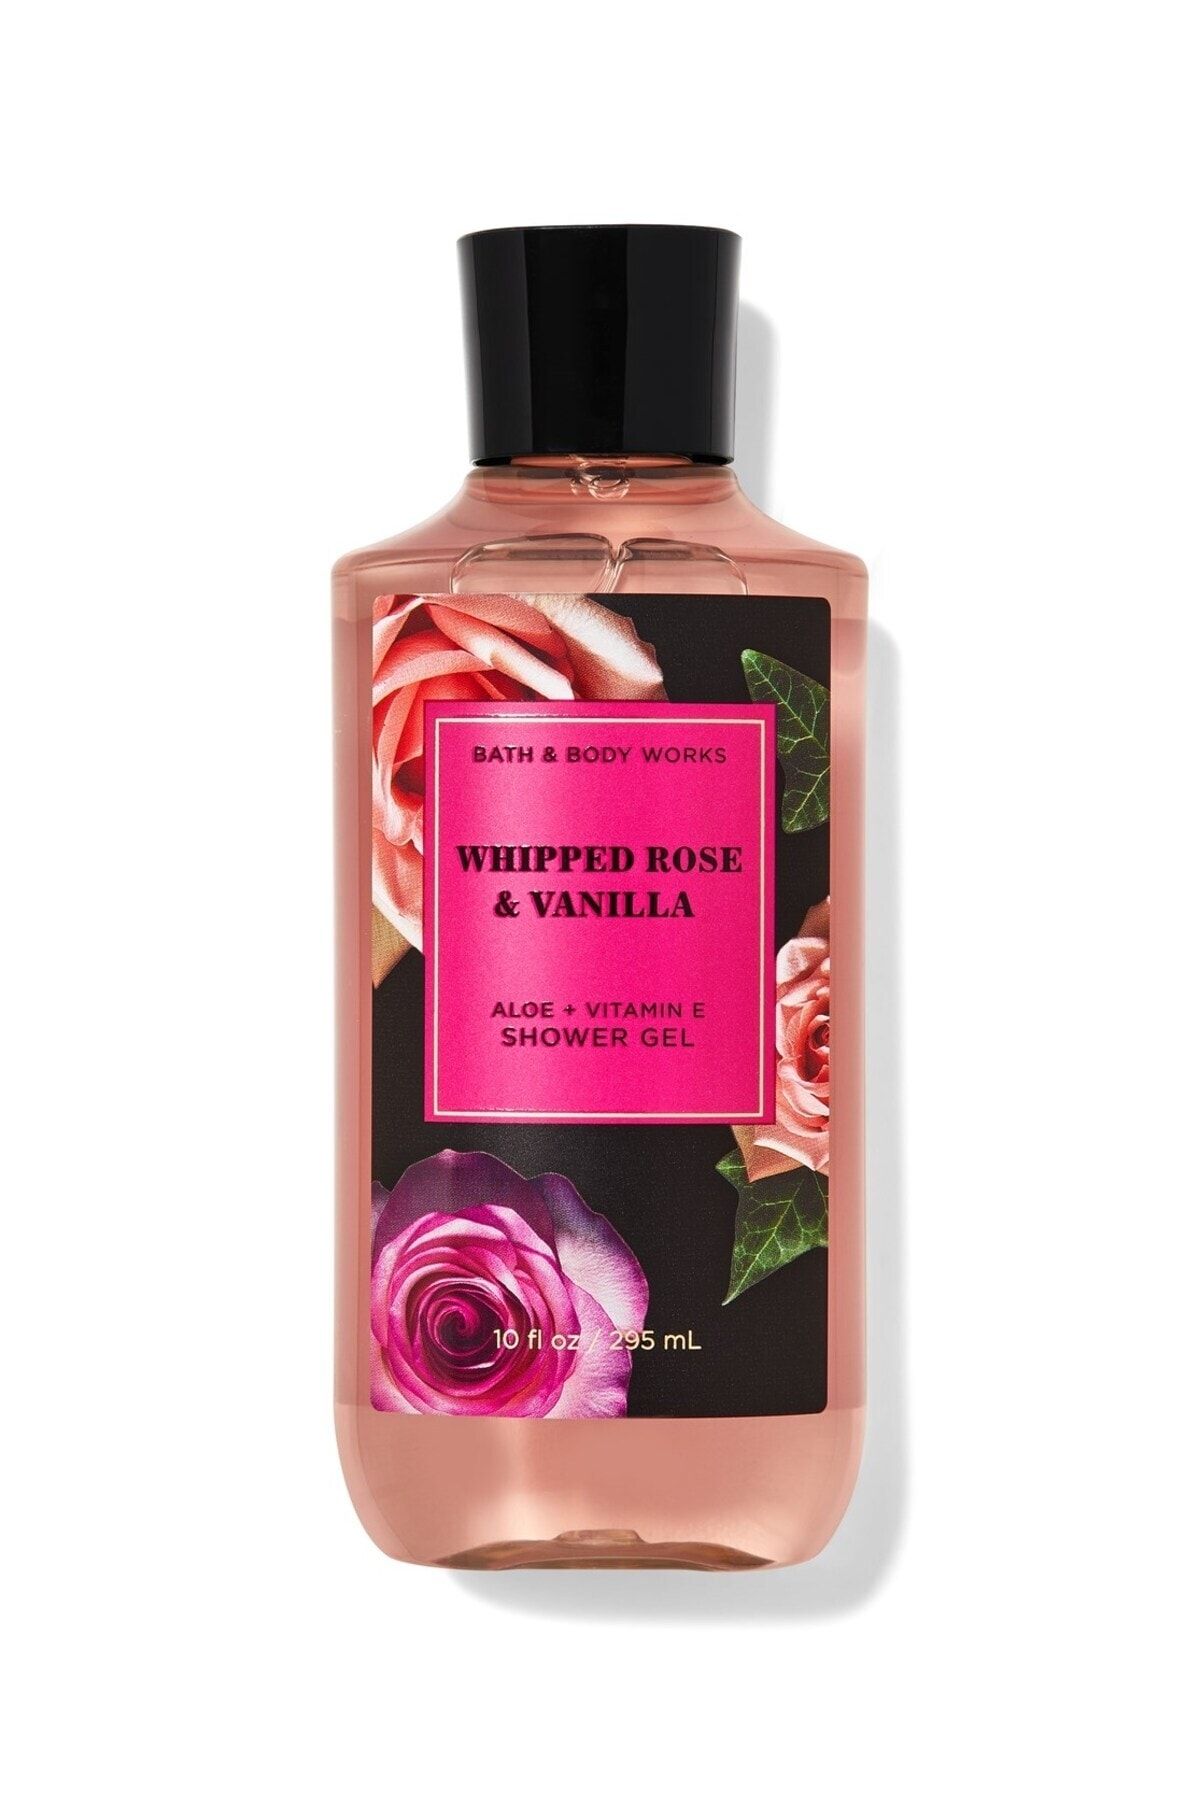 Bath and body works whipped rose and vanilla